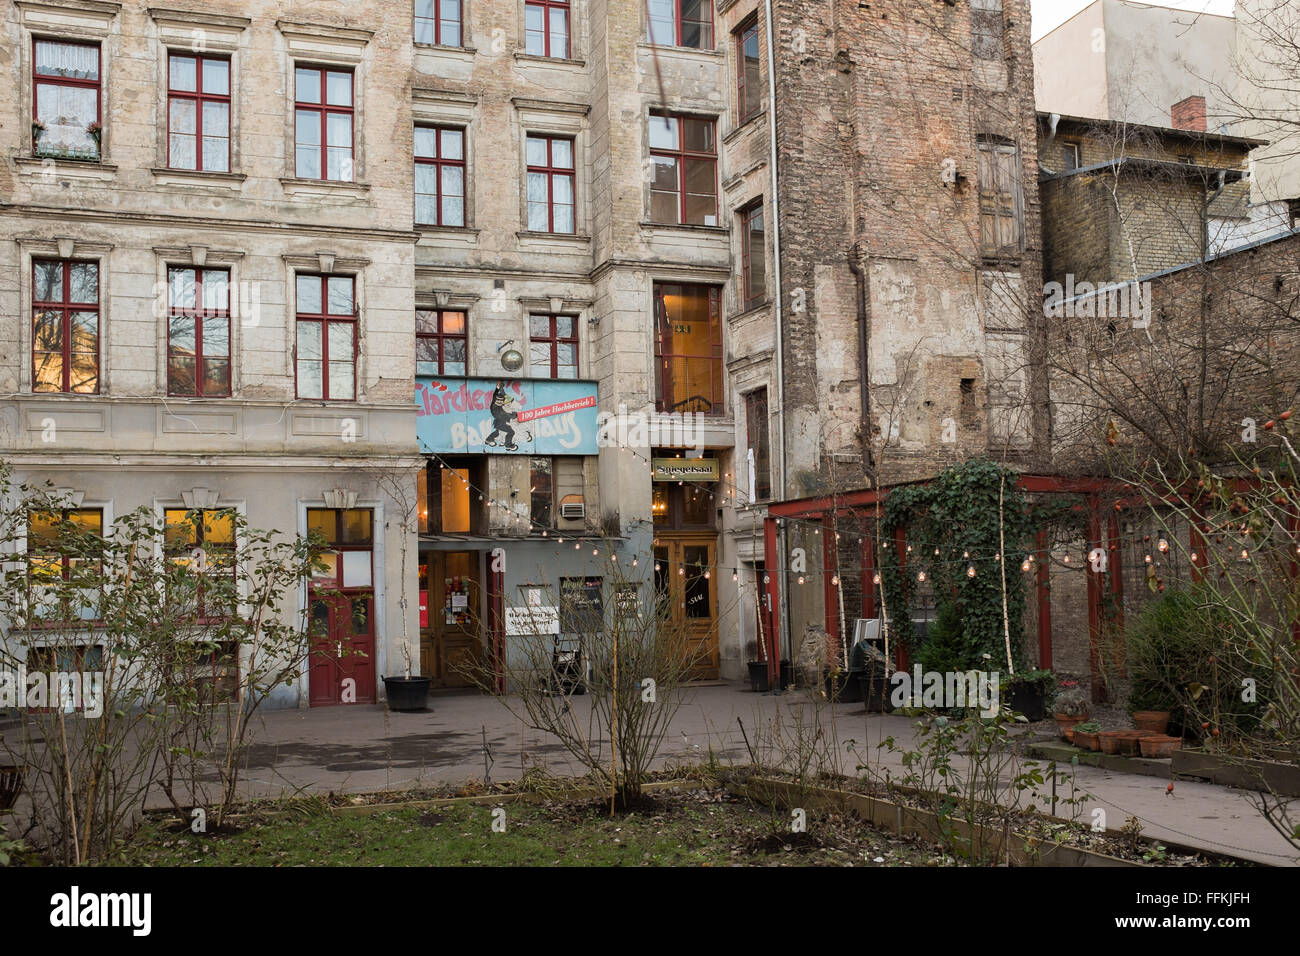 BERLIN, 28 JANUARY: The Clarchens Ballhaus, Auguststrasse Berlin Mitte on January 28 2016. Formerly a ballroom now a nightclub. Stock Photo